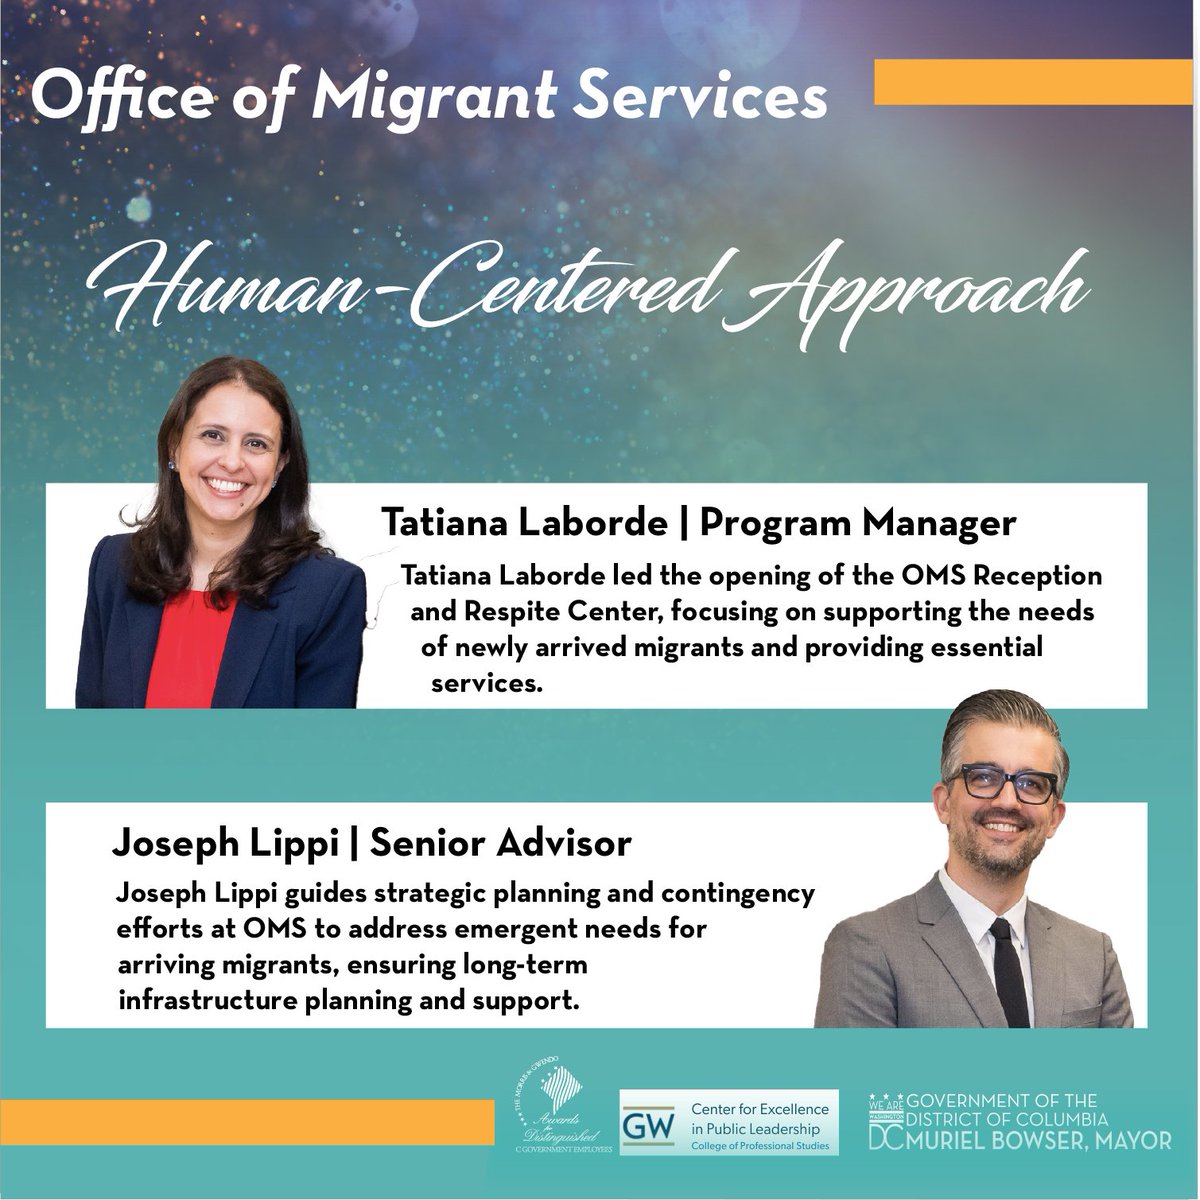 🌟 Meet the inspiring team at the Office of Migrant Services (OMS), honored for their dedication to supporting migrants in Washington, DC. From leadership to program management, their work is making a difference. #OfficeOfMigrantServices #SupportingMigrants #OMSTeam